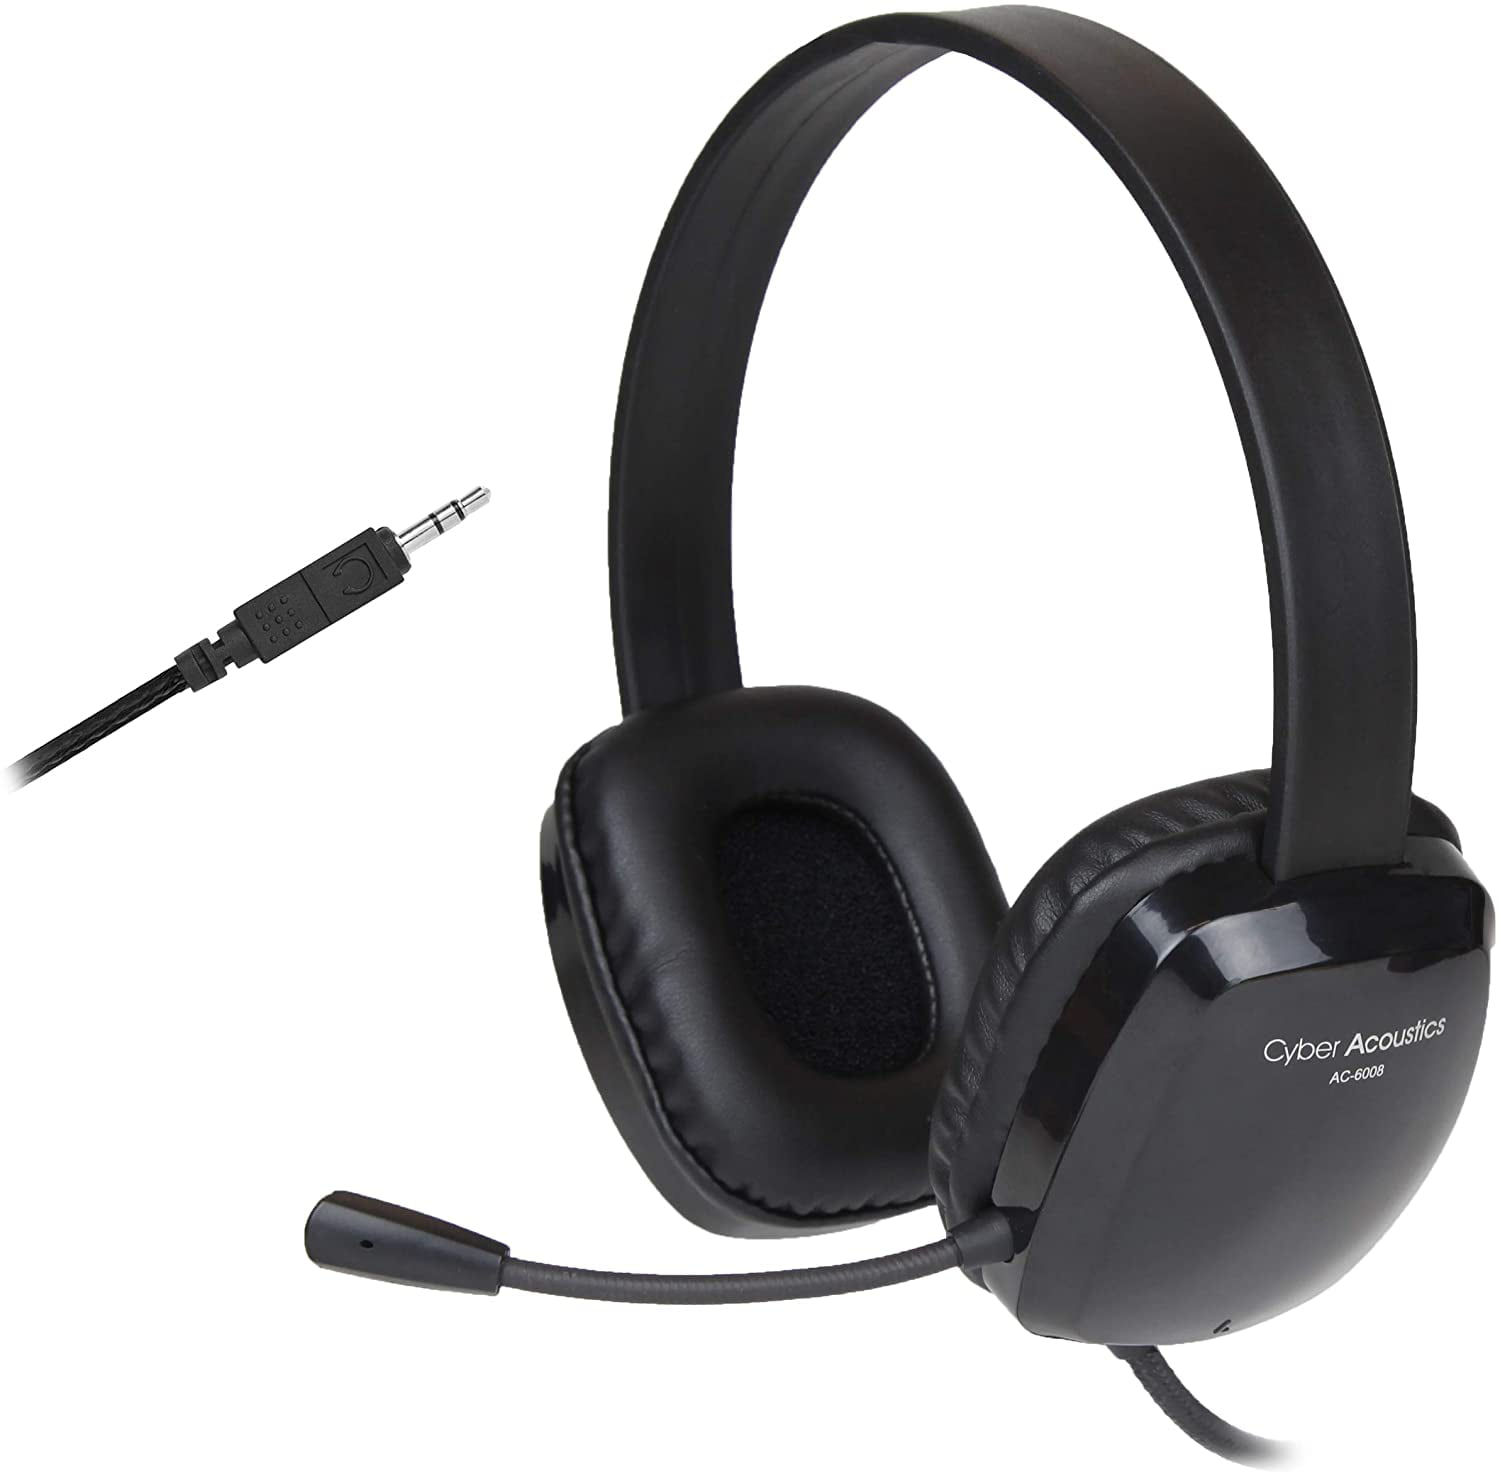 for PCs and Tablets in The Classroom or Home Cyber Acoustics 3.5mm Kids Stereo Headset with Headphones and Noise Cancelling Microphone Featuring Limited Volume Output AC-4800 